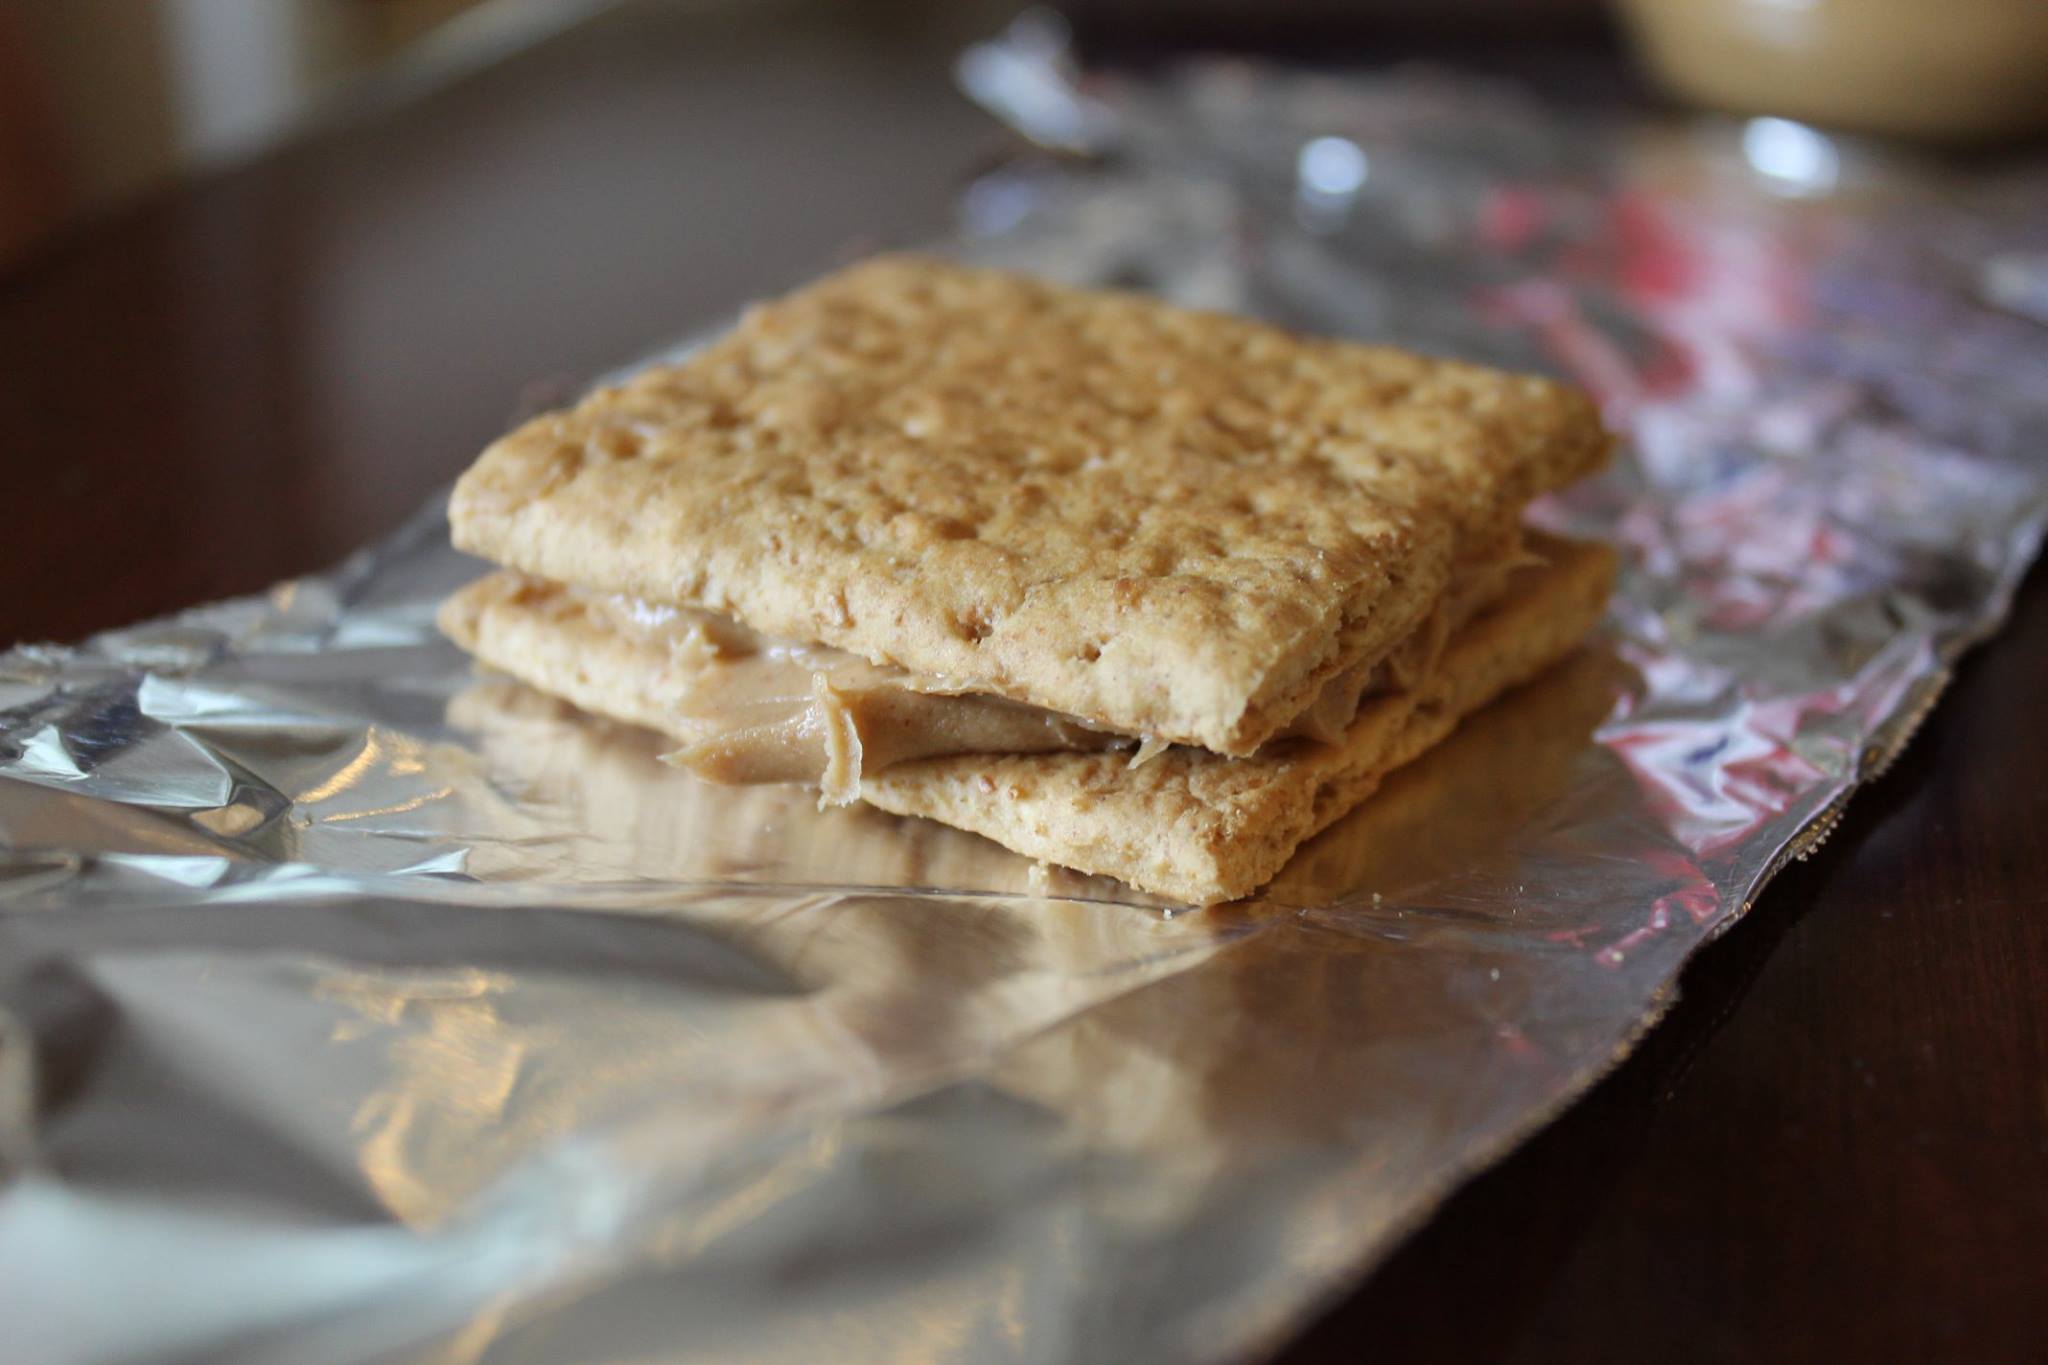 This Peanut Butter And Graham Cracker Snack Is The Perfect Edible